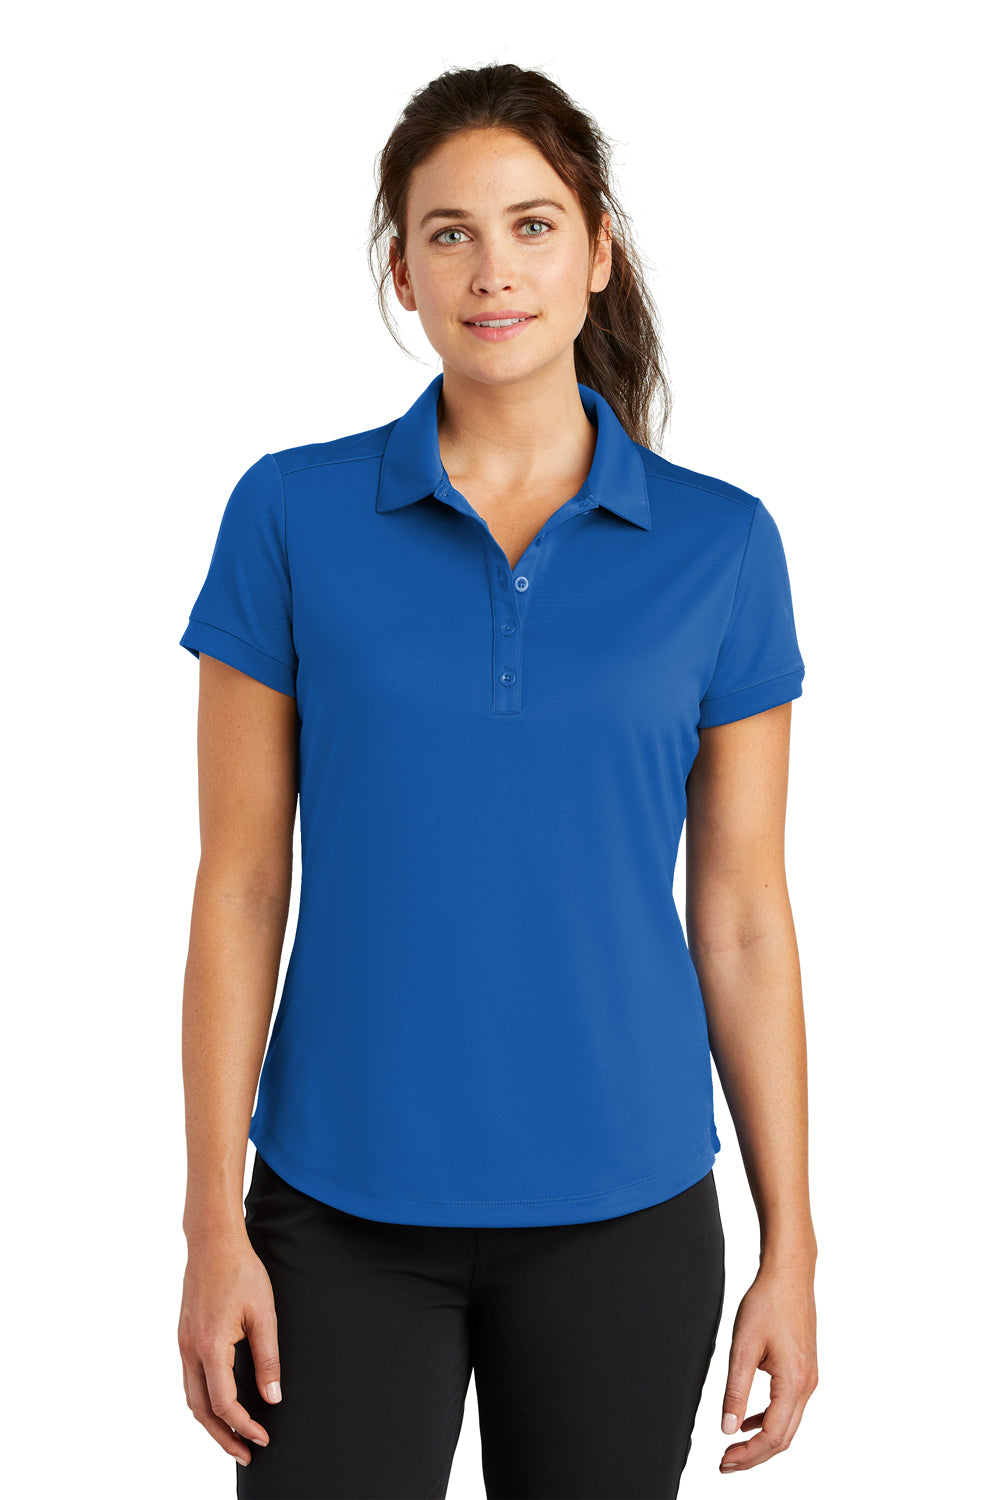 Nike 811807 Womens Players Dri-Fit Moisture Wicking Short Sleeve Polo Shirt Gym Blue Model Front